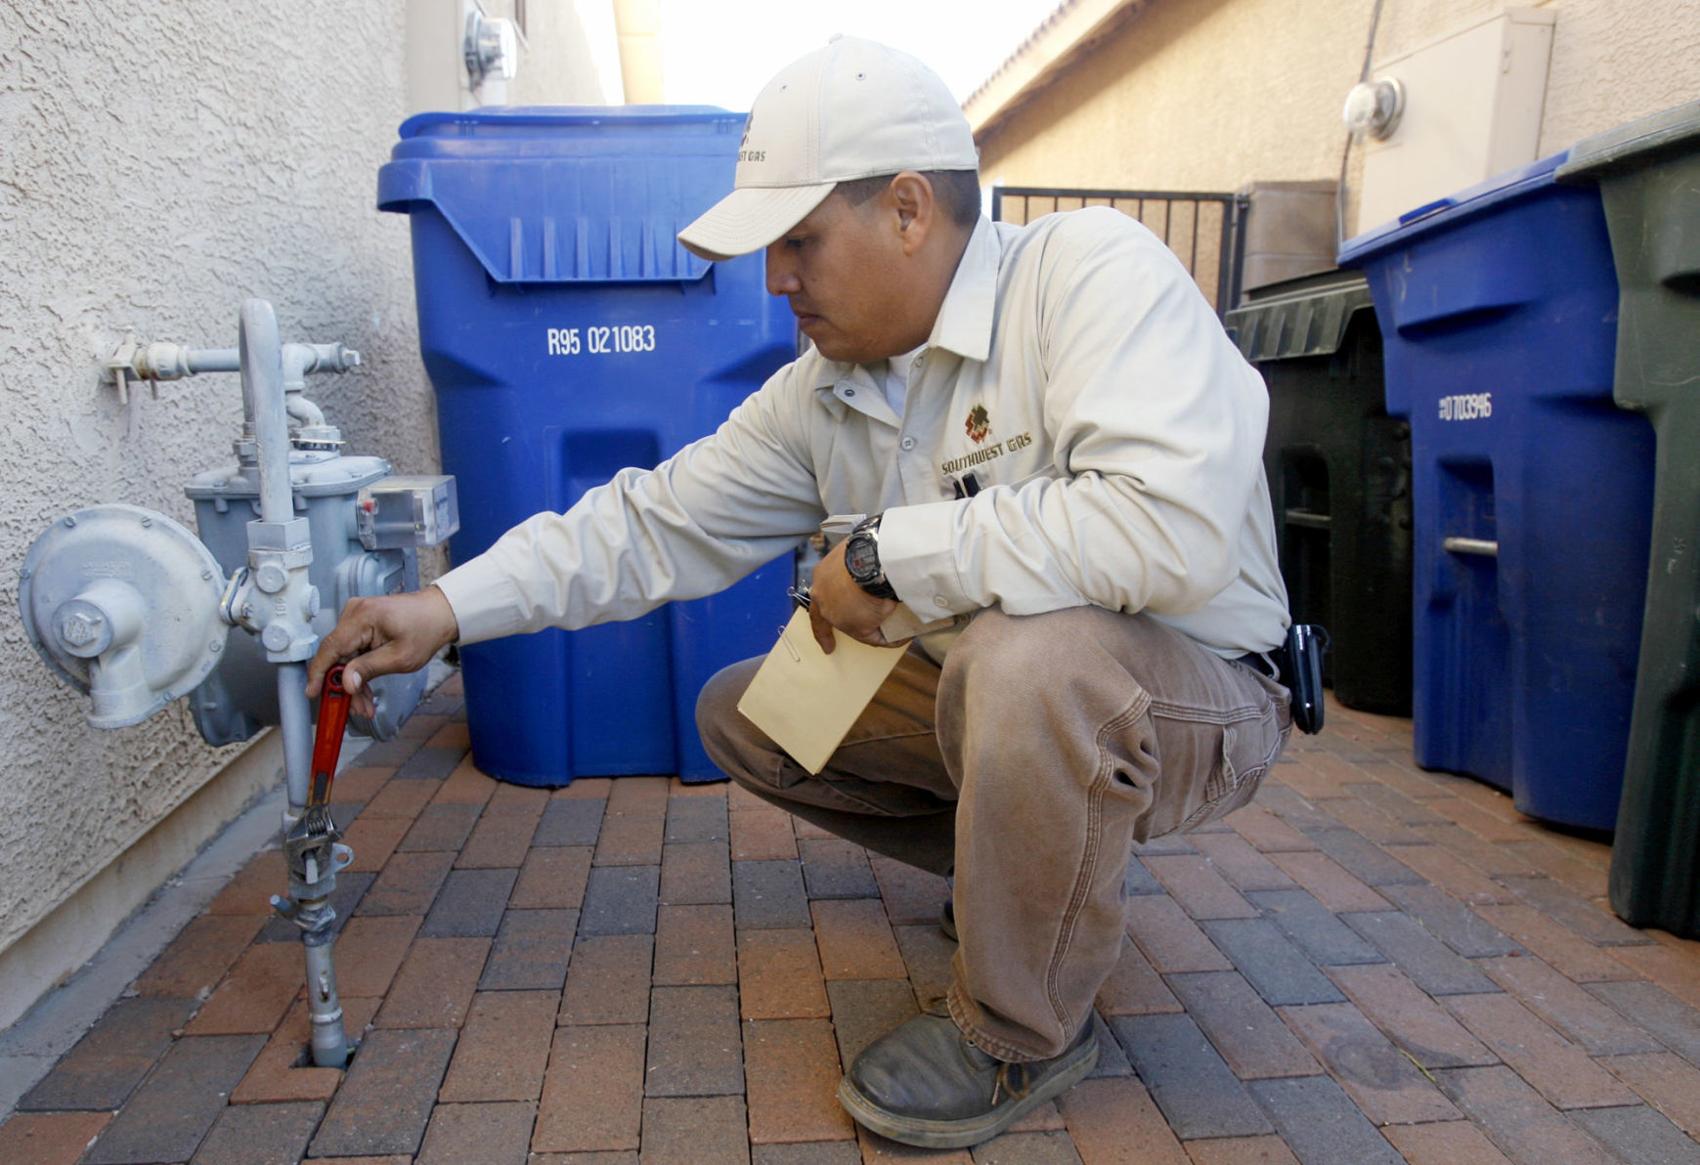 tucson-gas-bills-could-rise-nearly-12-under-southwest-gas-plan